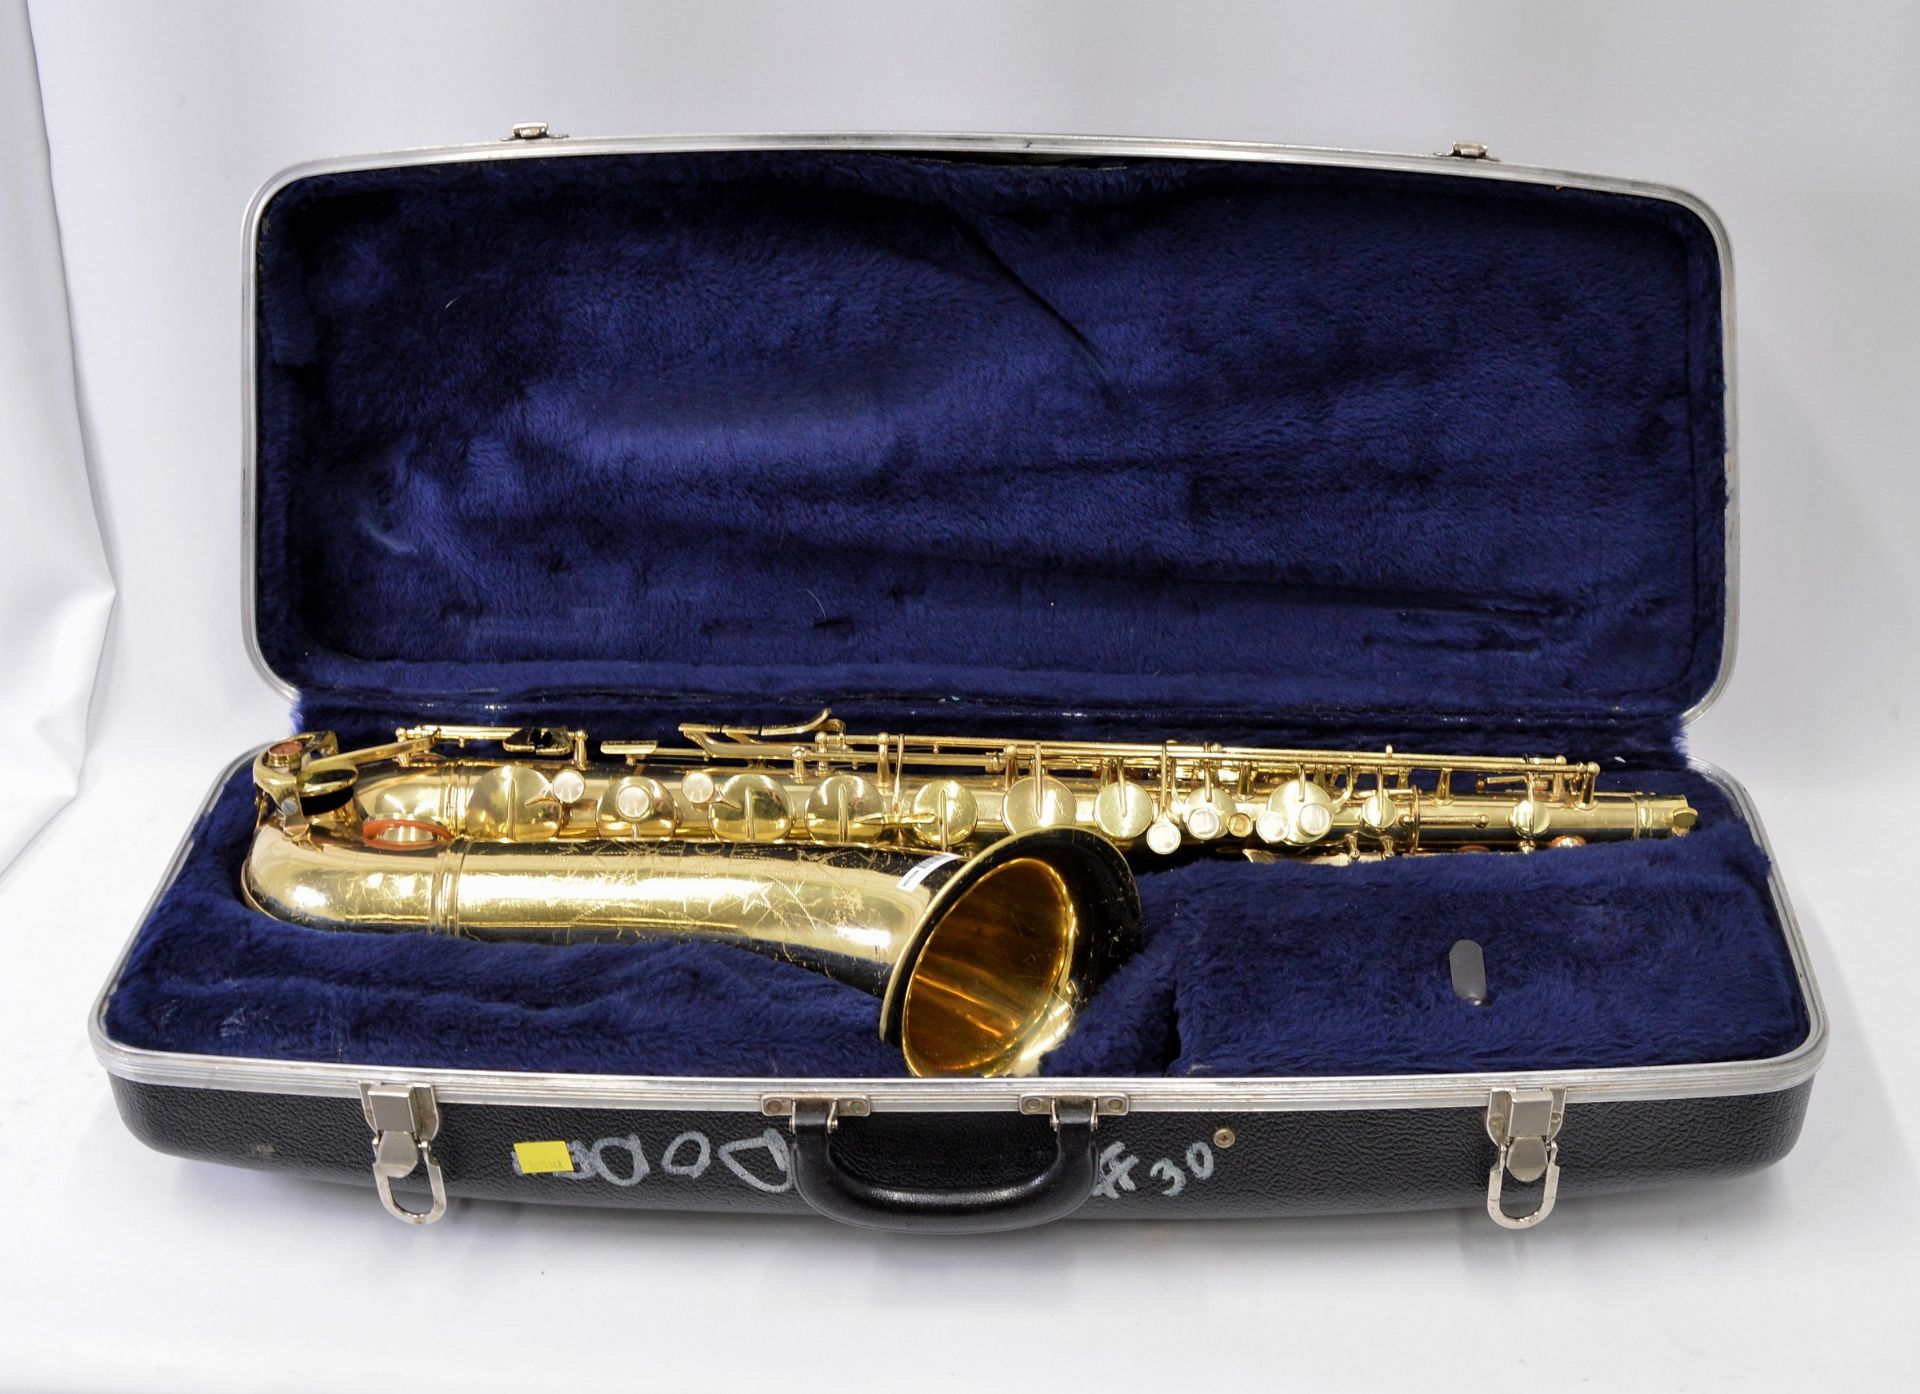 Conn Saxophone with Case. Serial No. N153725.